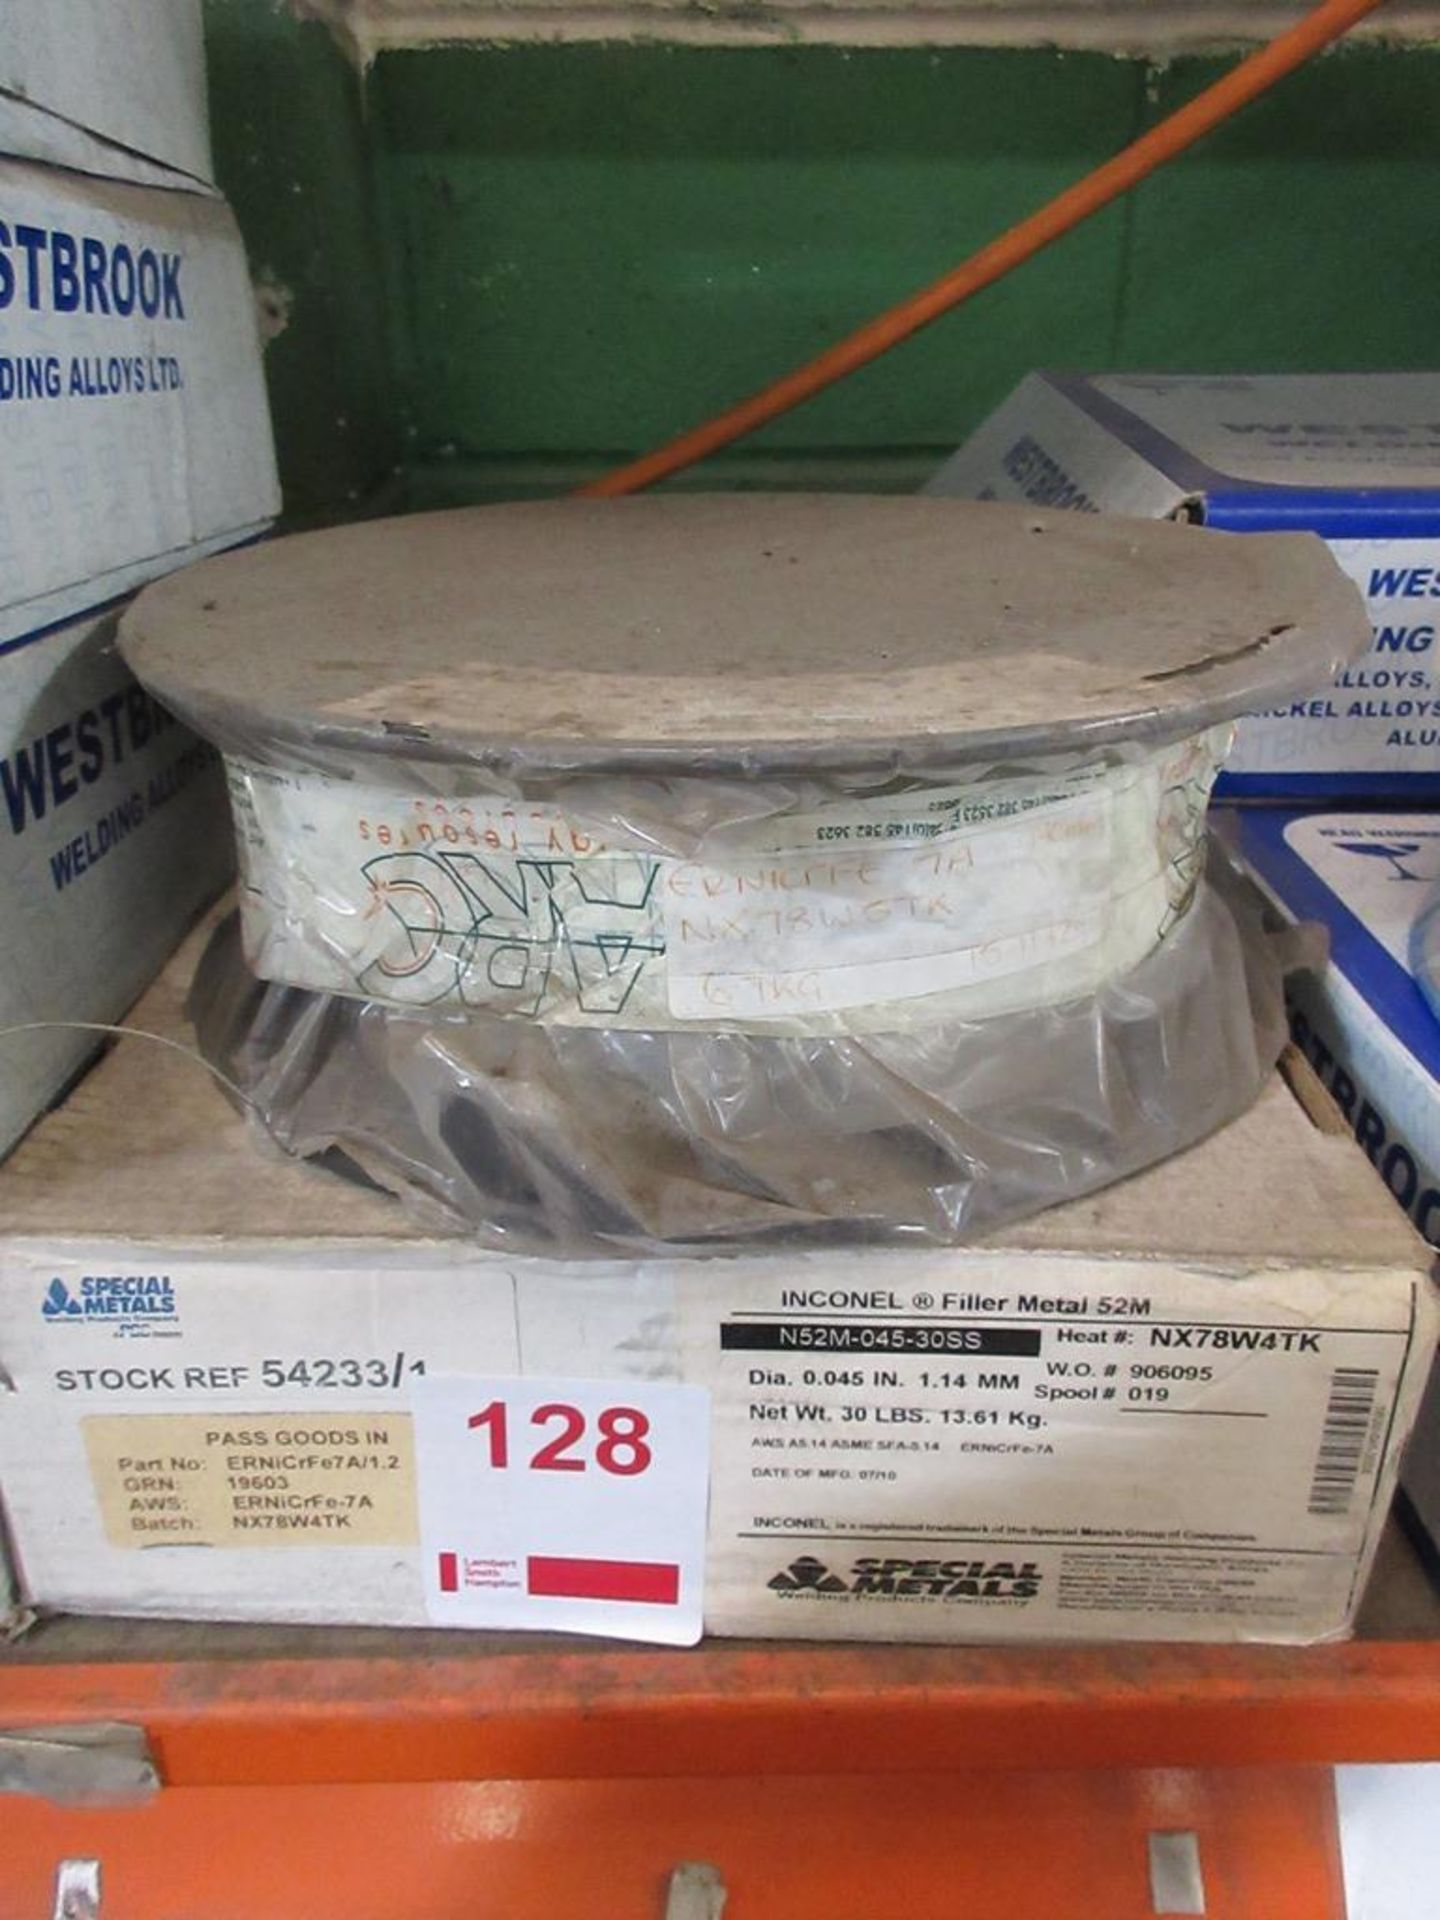 Two reels of Inconel filler metal, part no. ERNICRFE7A-1.2